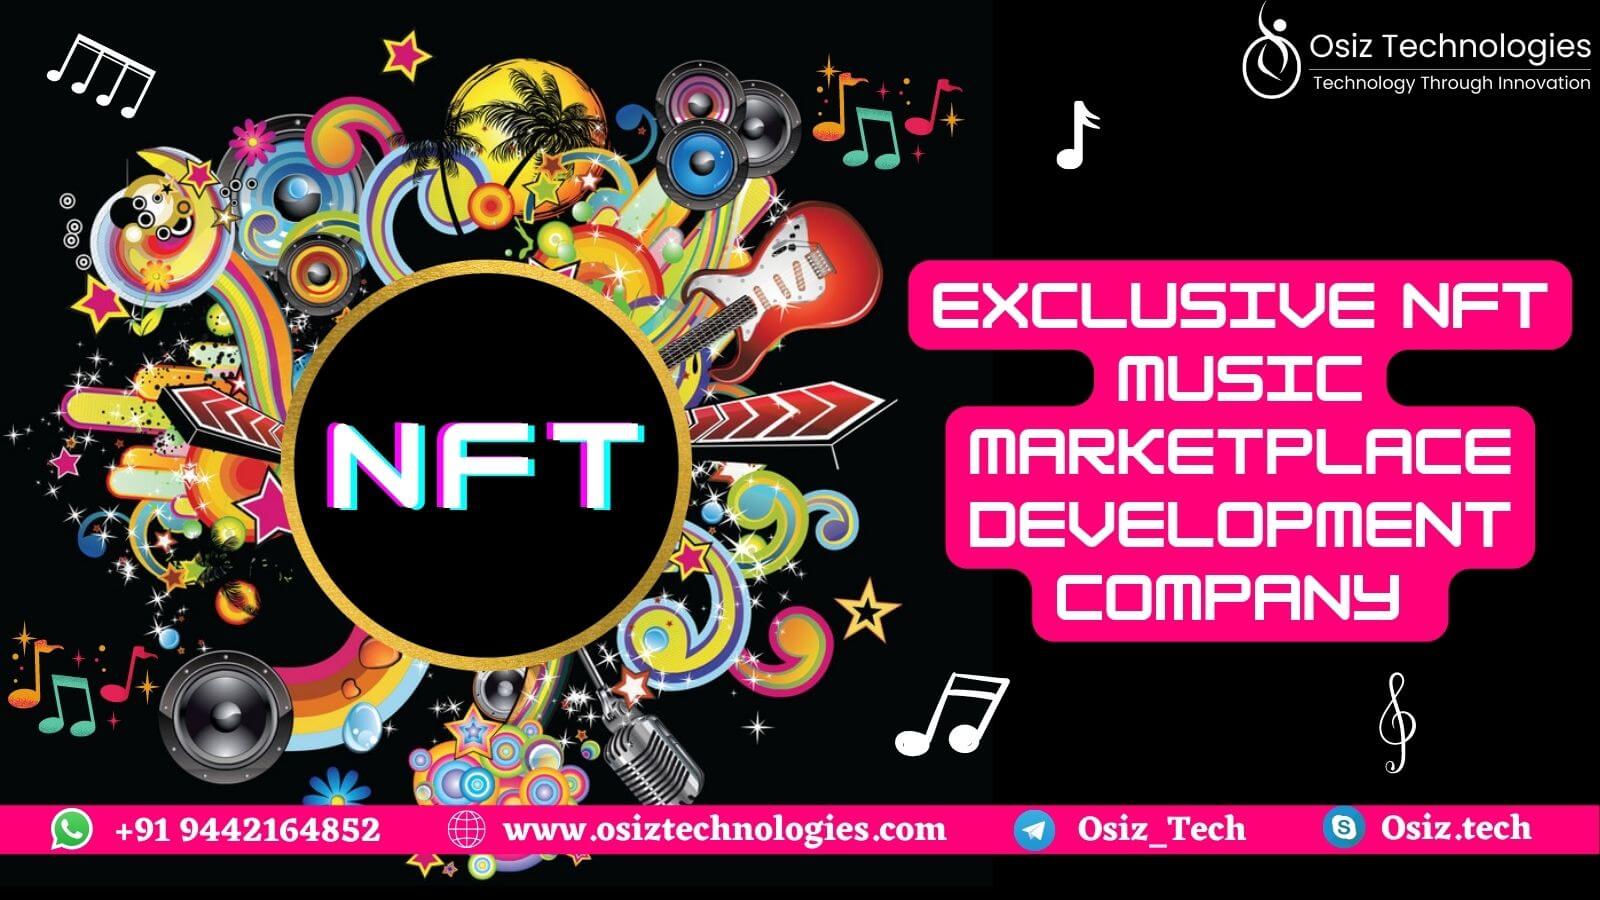 Discover Your Distinct Music With Our NFT Music Marketplace Development Services